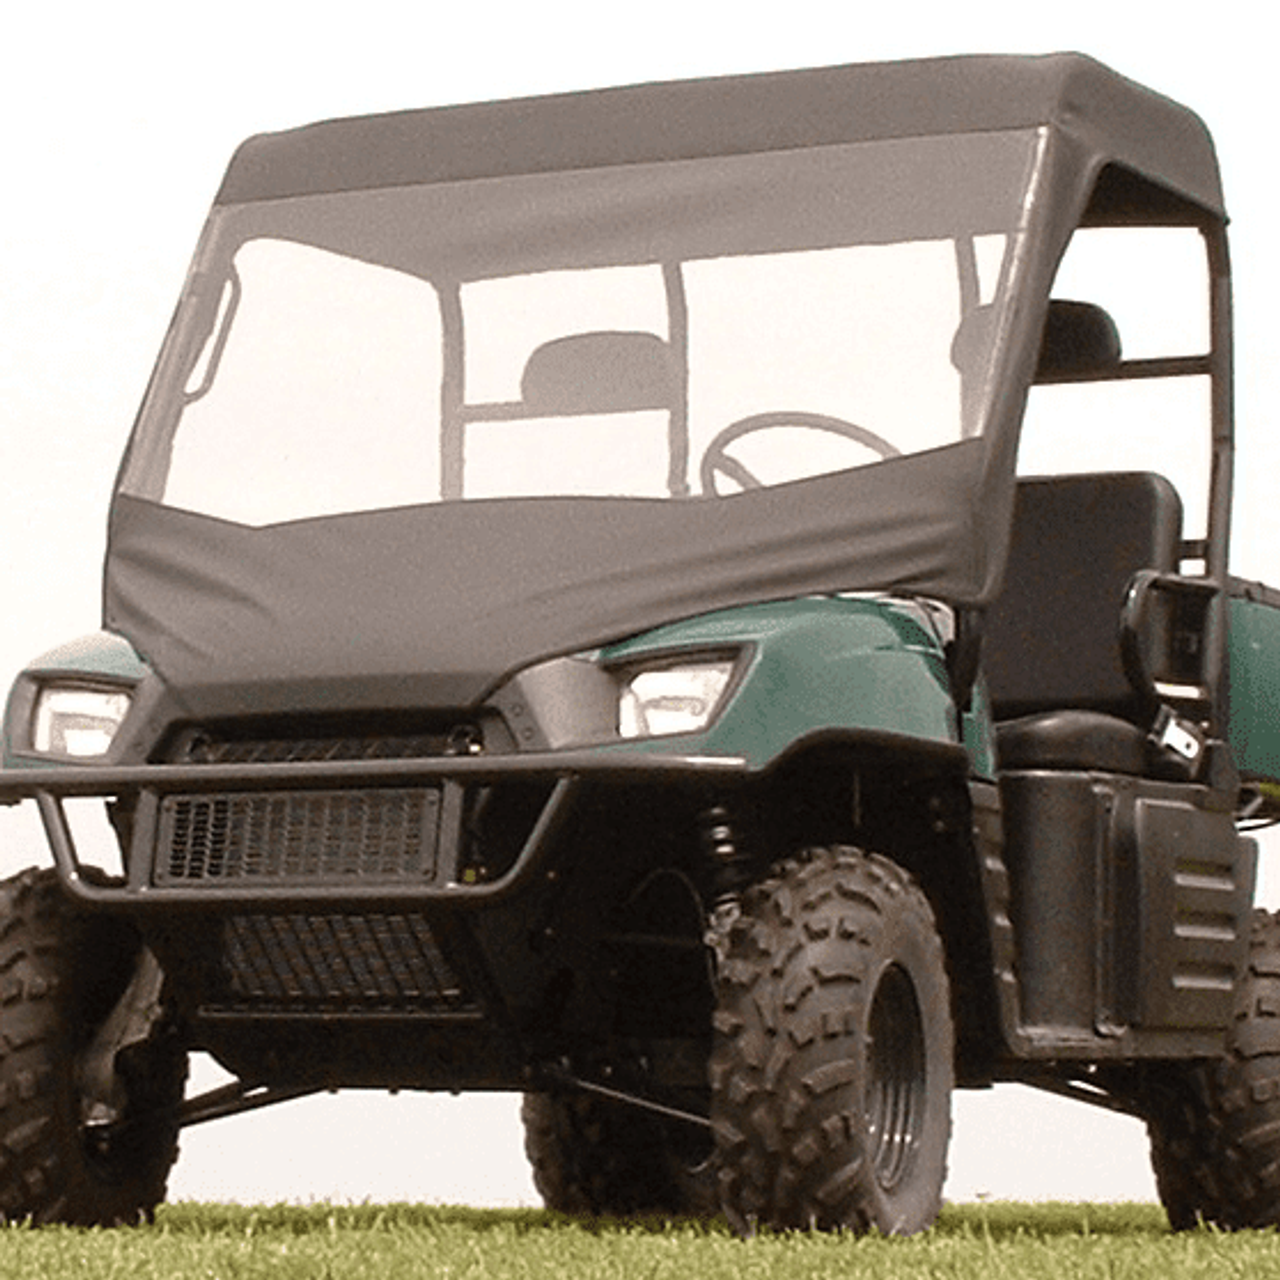 Soft Windshield and Top - 2010-14 Mid-Size Polaris Ranger